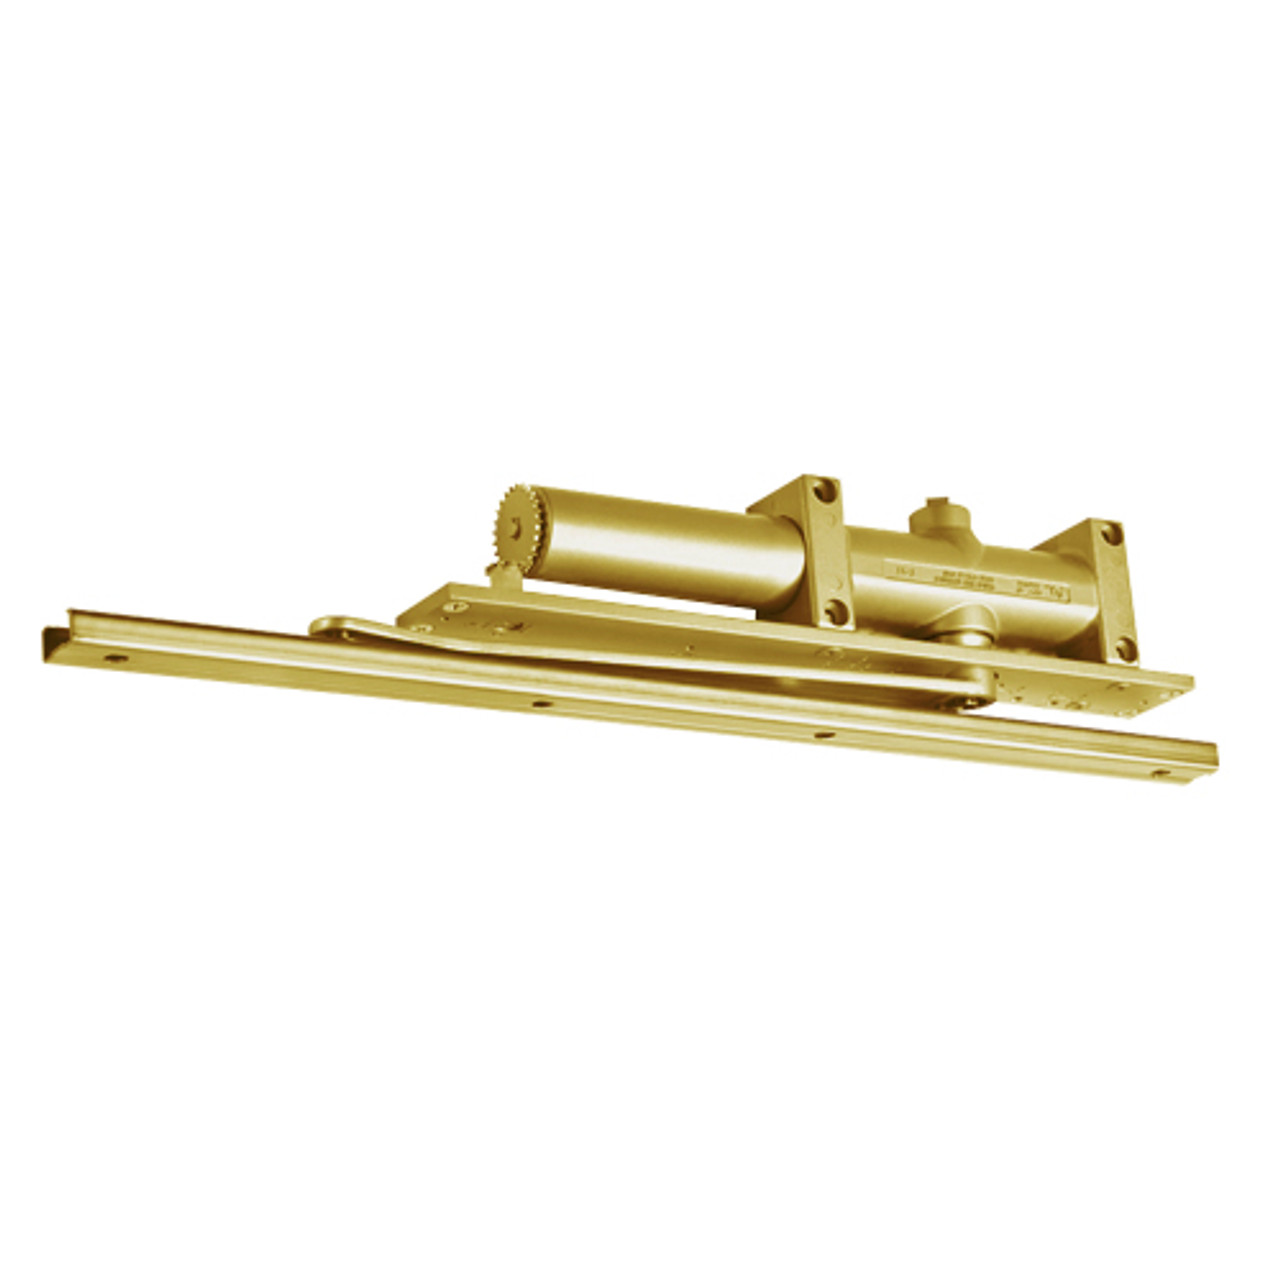 7970-696-RH Norton 7900 Series Non-Hold Open Overhead Concealed Security Closers with Multi-Sized Spring 1-6 in Gold Finish